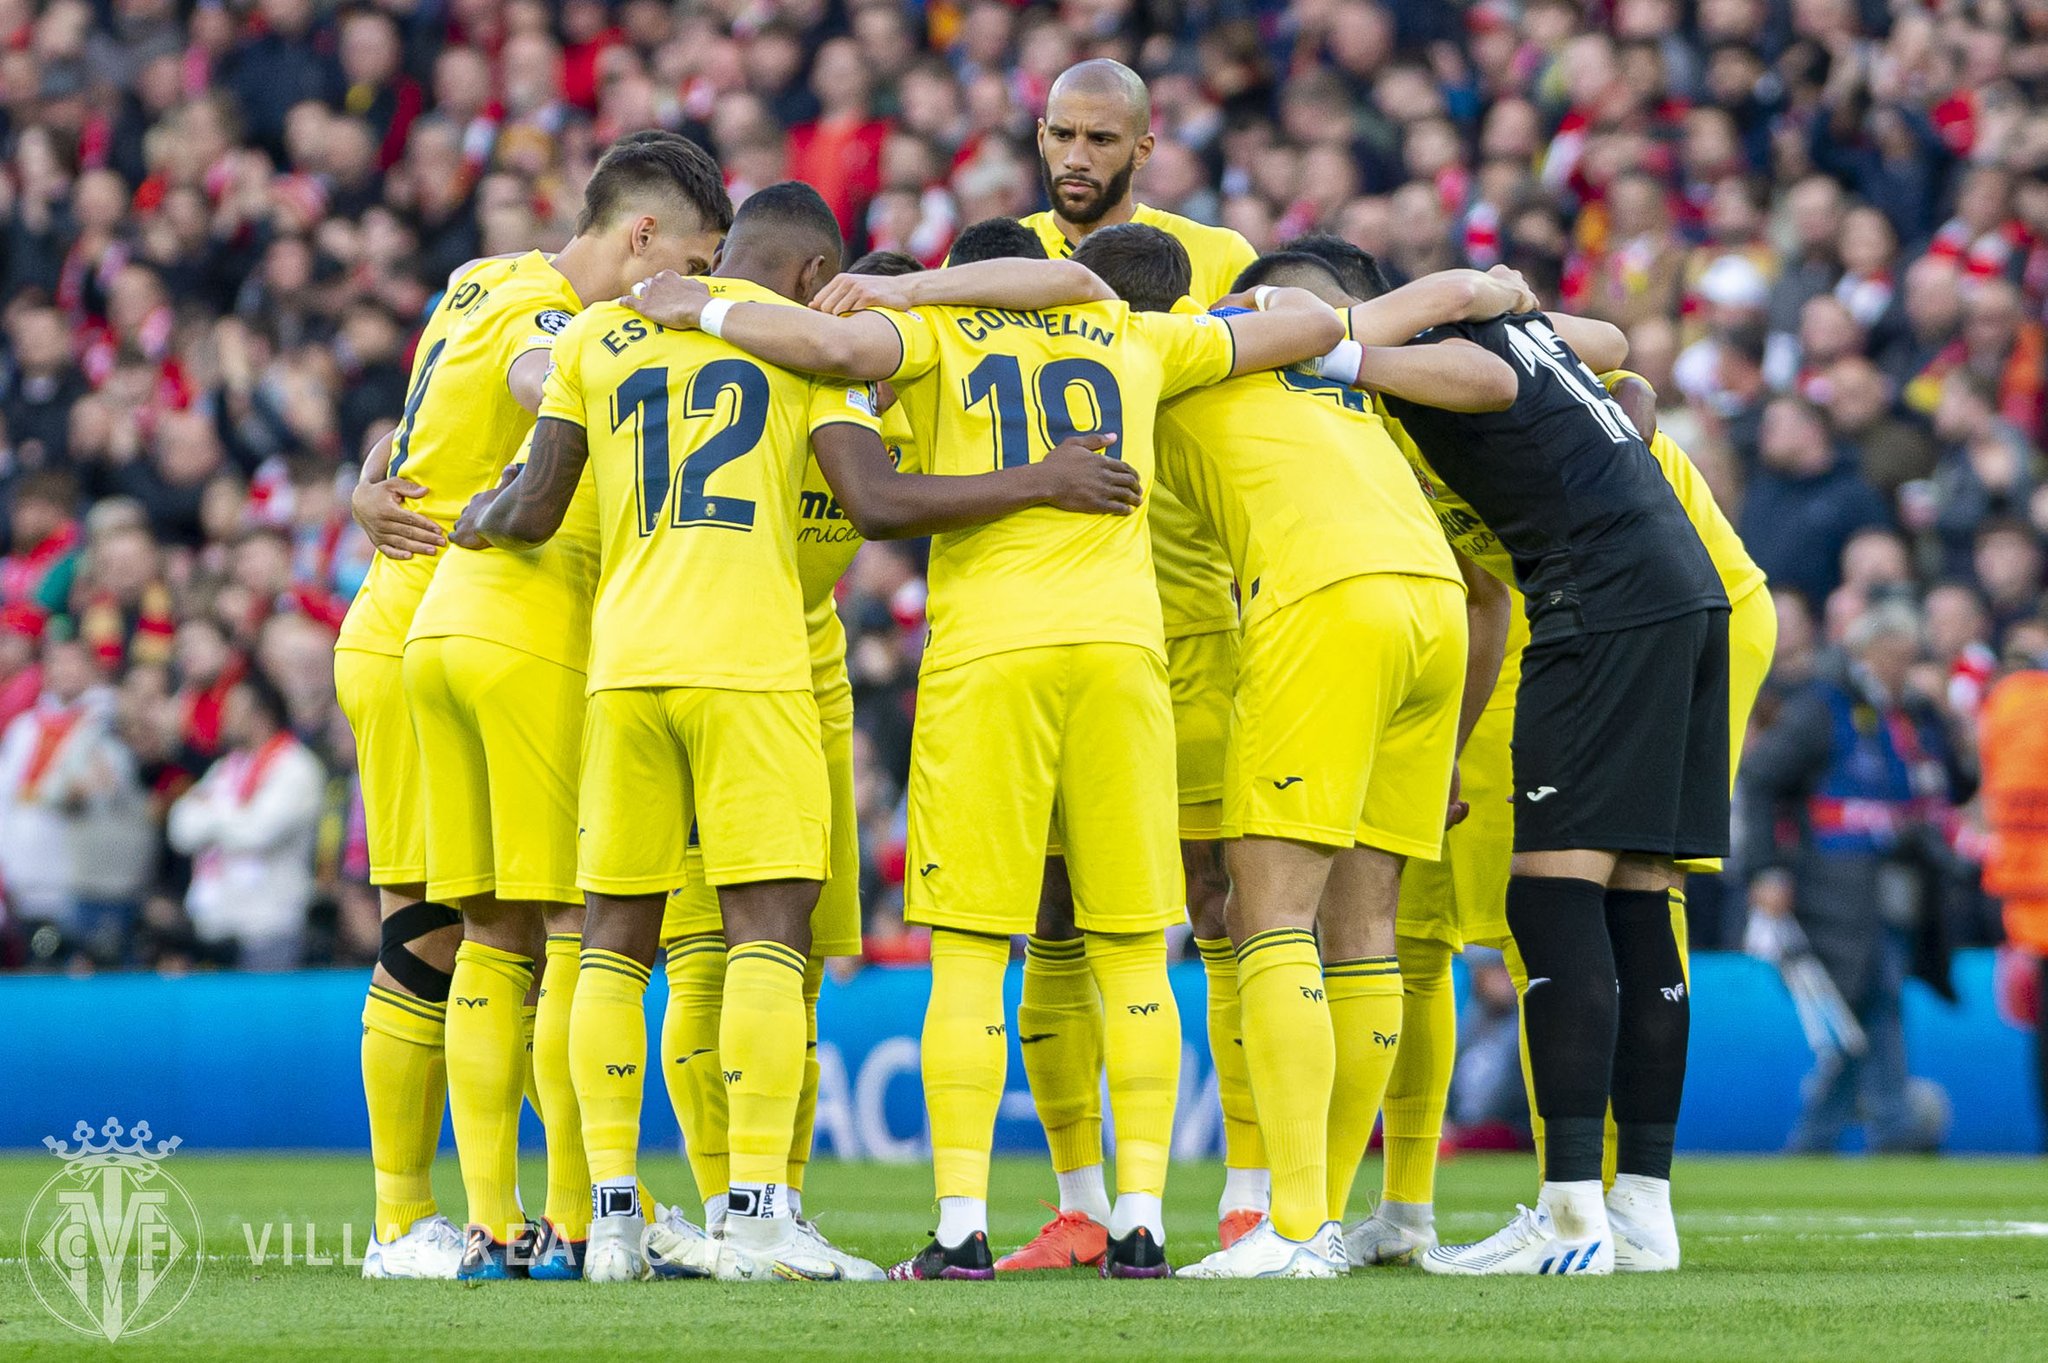 Champions League Semi-Final LIVE: Underdogs Villarreal hope to overturn 2-0 deficit on home turf, Follow Villarreal vs Liverpool 2nd Leg LIVE Streaming: Check Team News